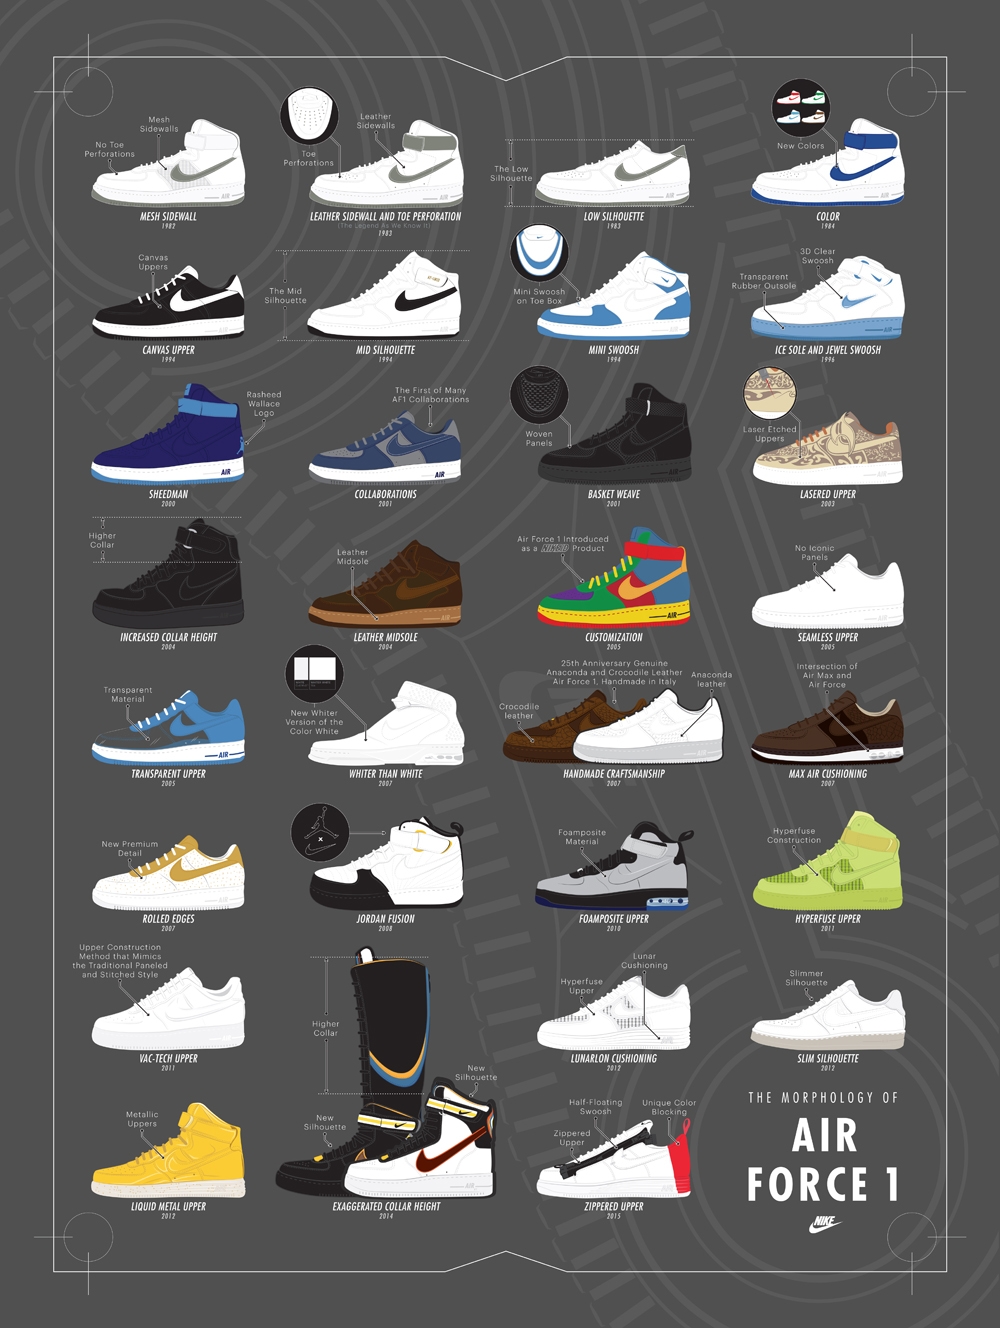 air jordans over the years